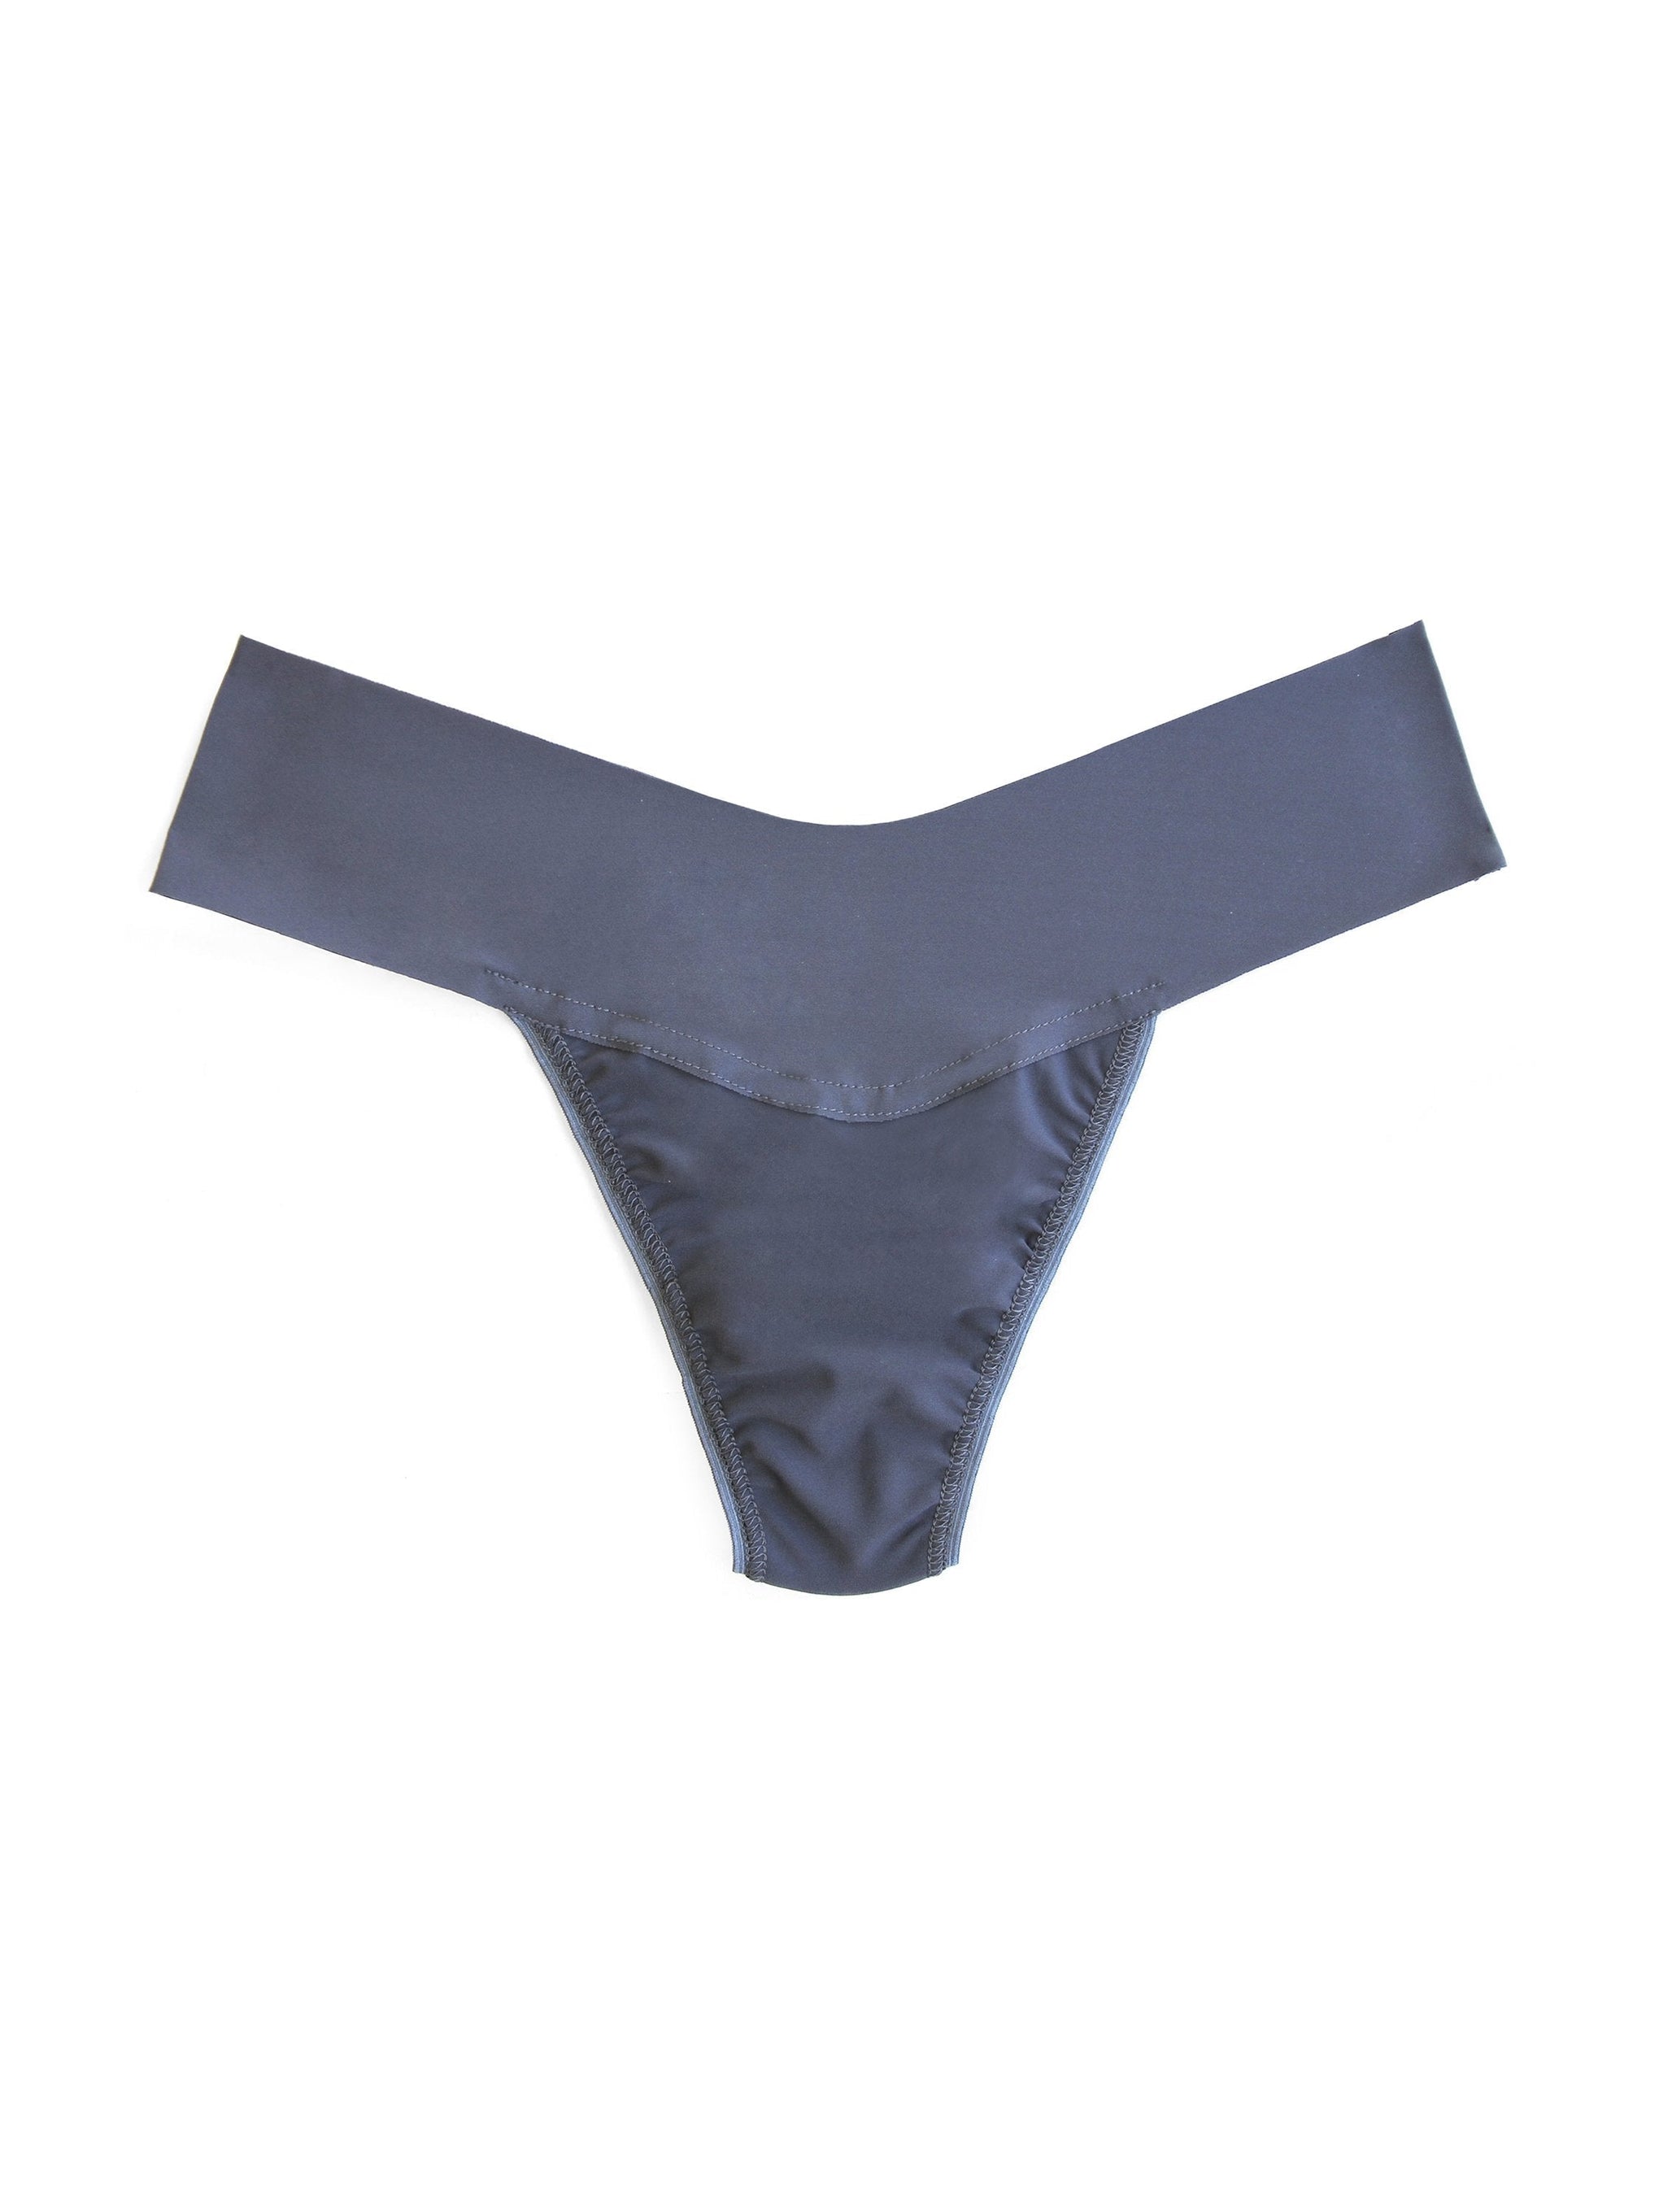 Hanky Panky Breathe G-String Thong in Taupe